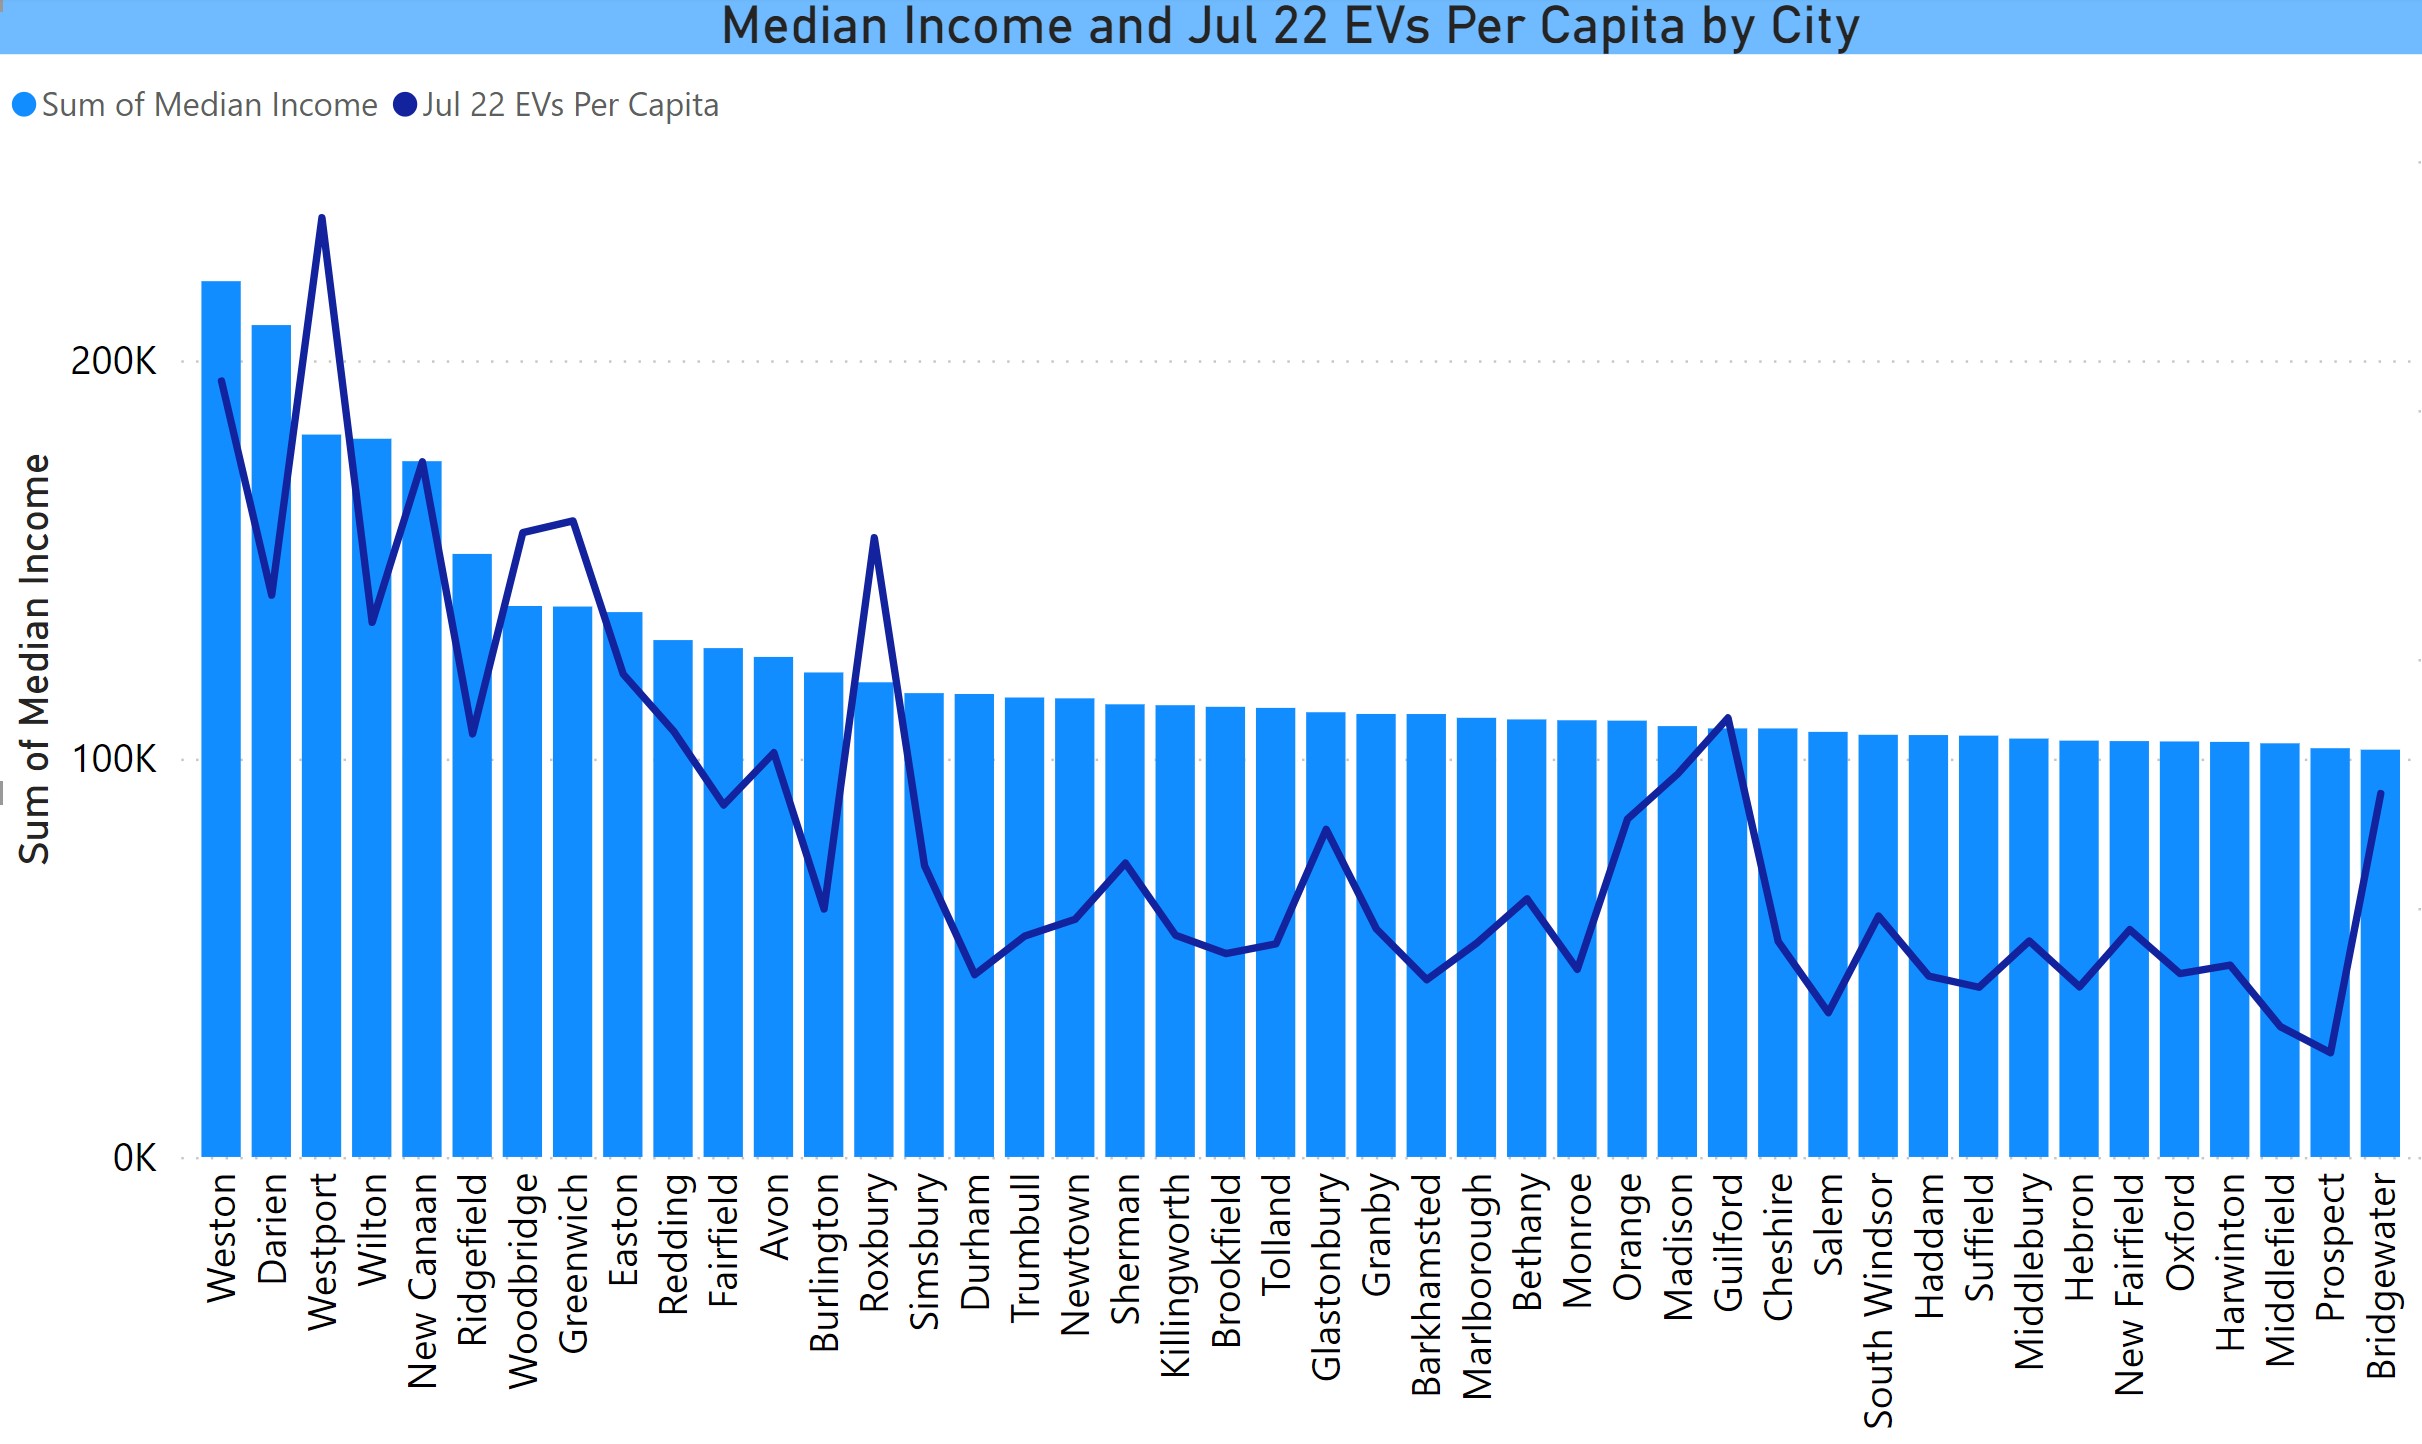 EVs Per Capita with Median Income July 2022